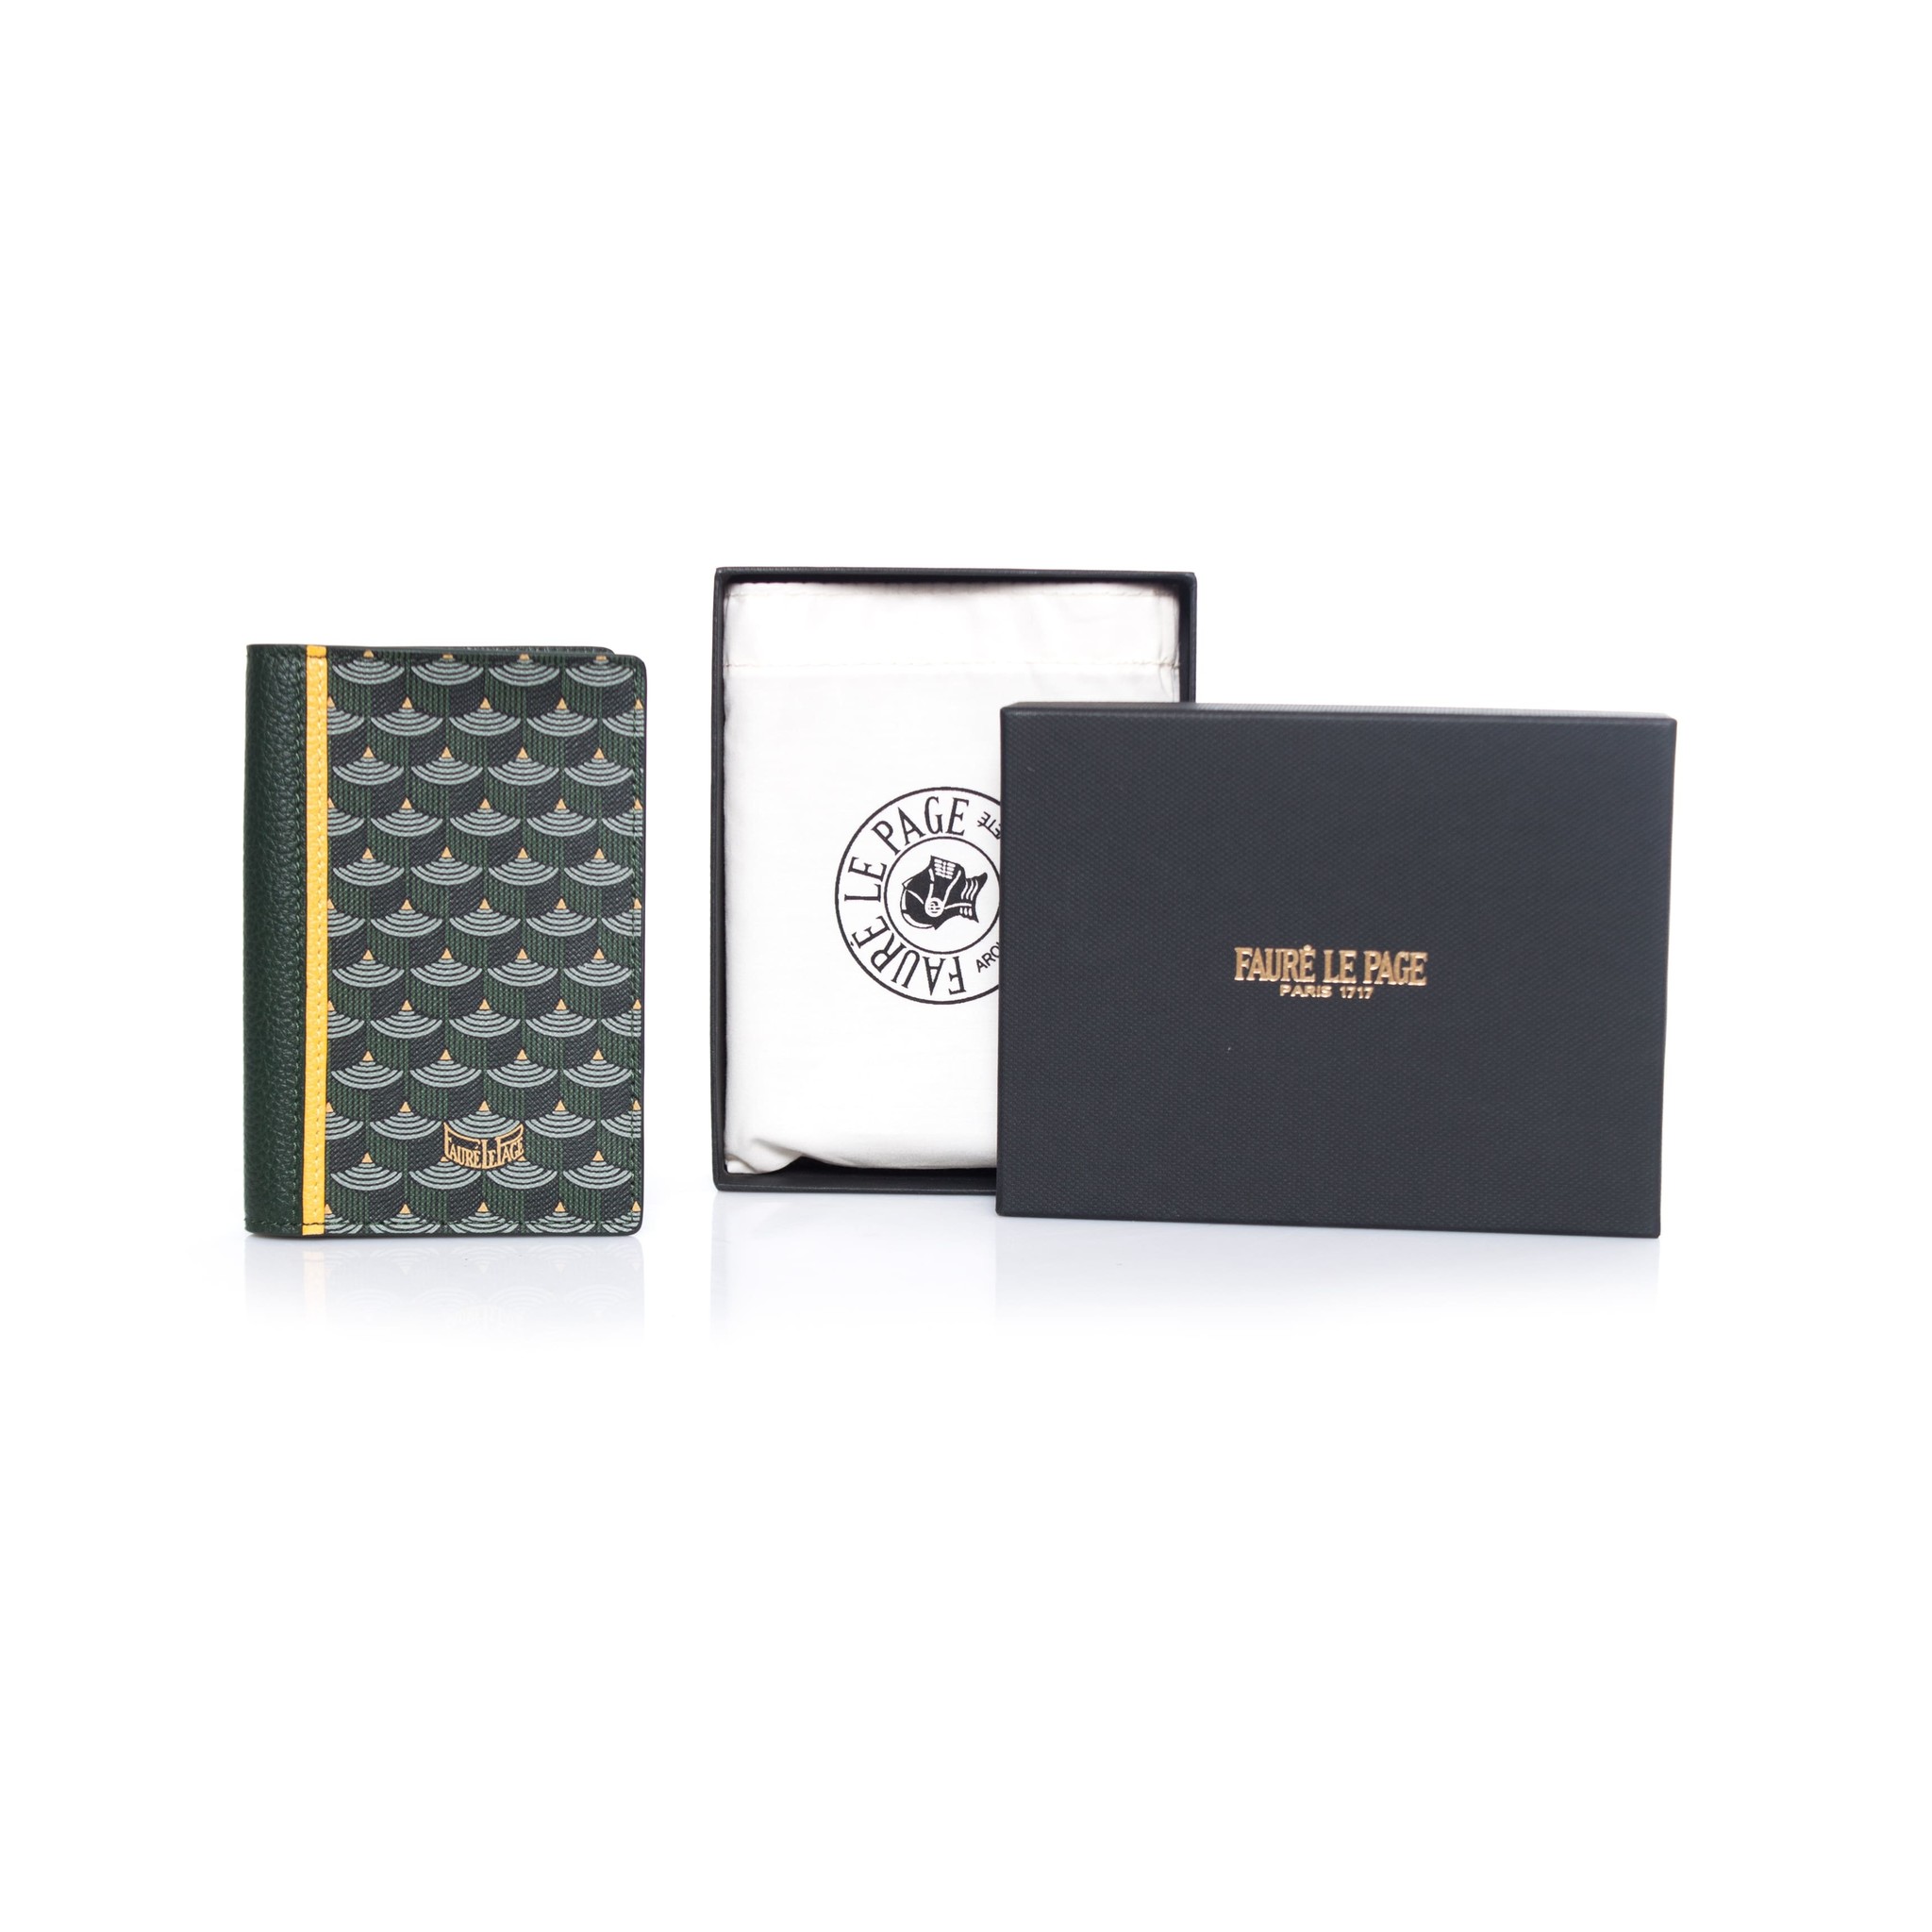 Faure Le Page, Passport holder in green and yellow. - Unique Designer Pieces